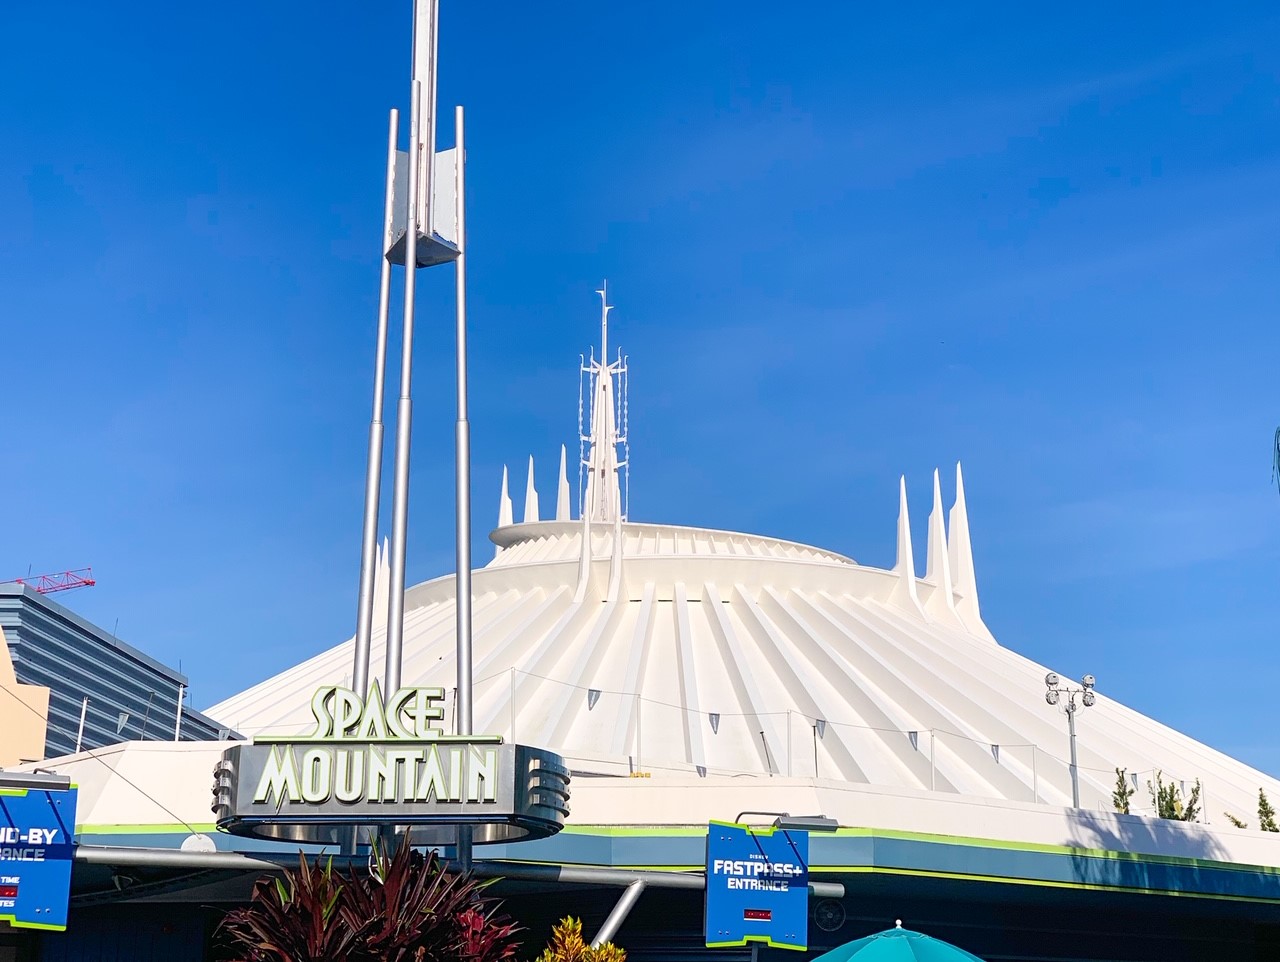 white futuristic building against blue sky with space mountain sign